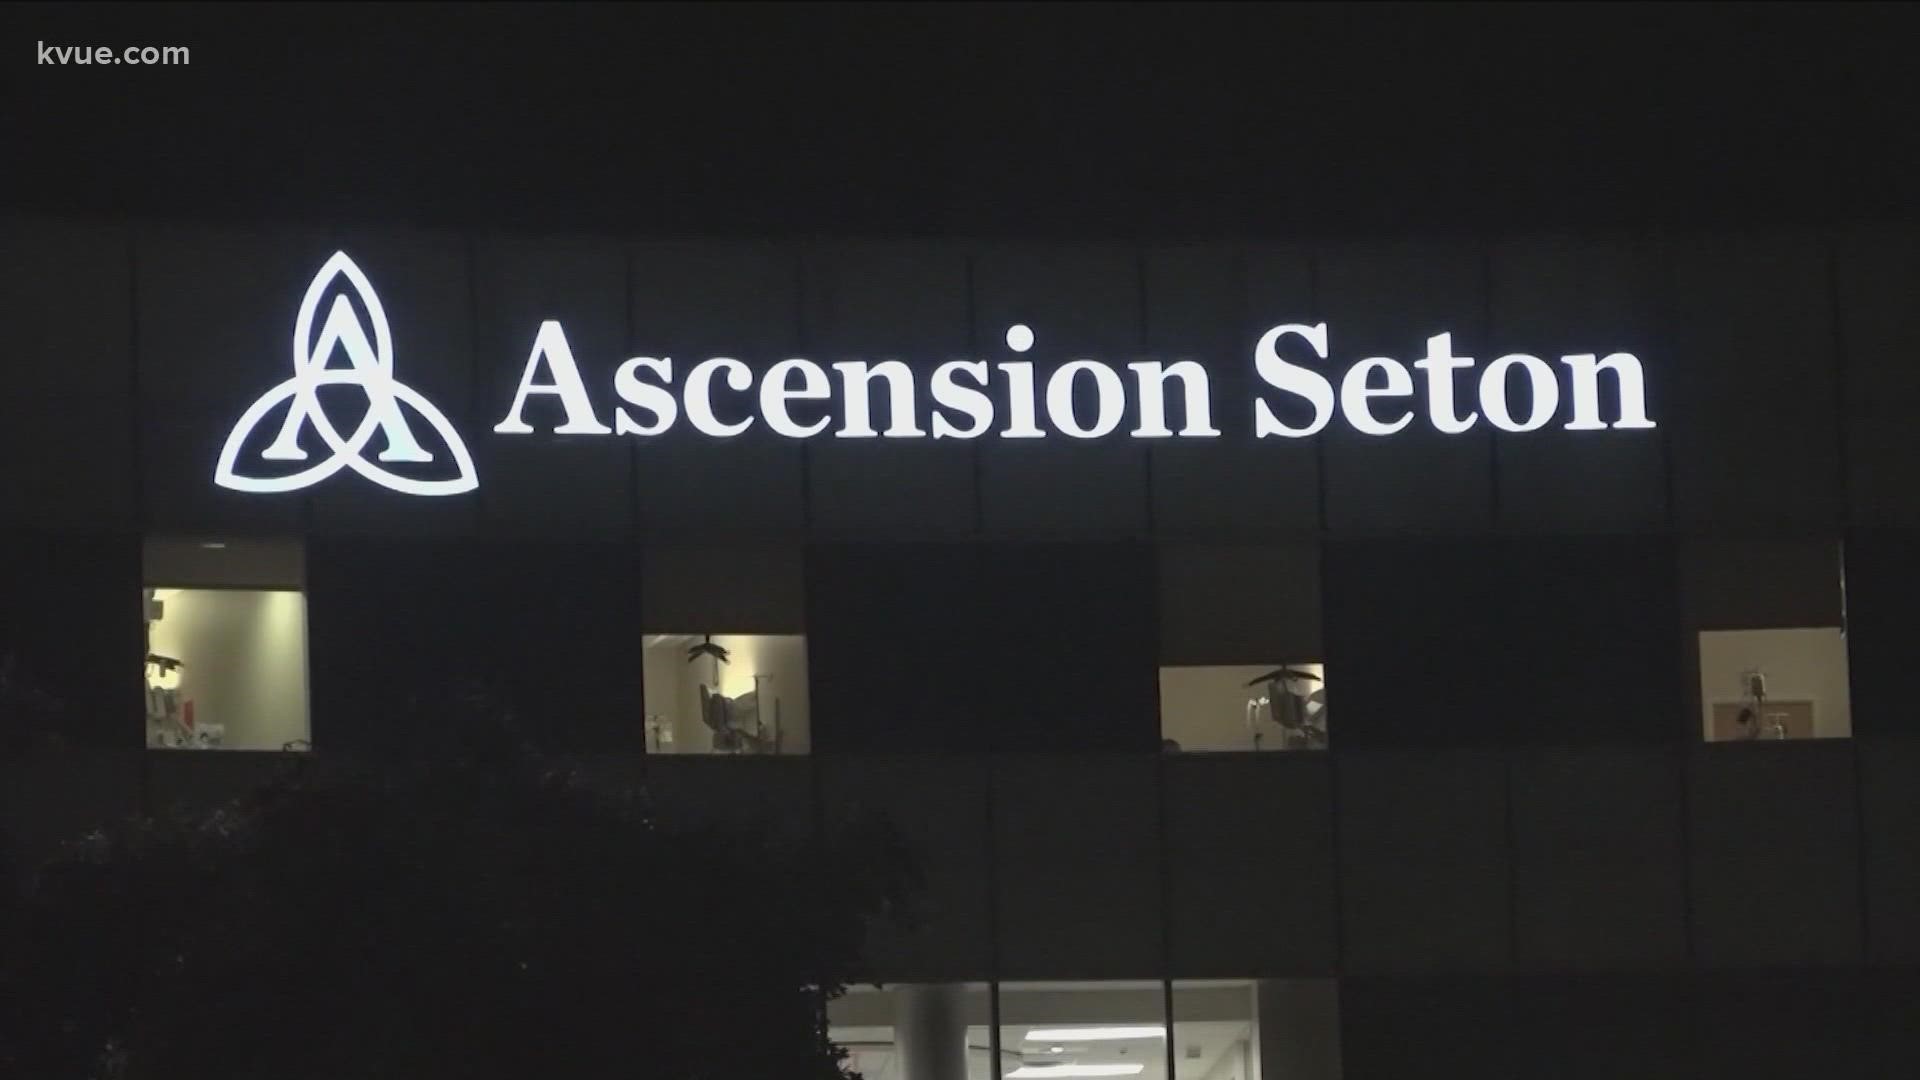 Ascension Seton is opening a new clinic in Georgetown.